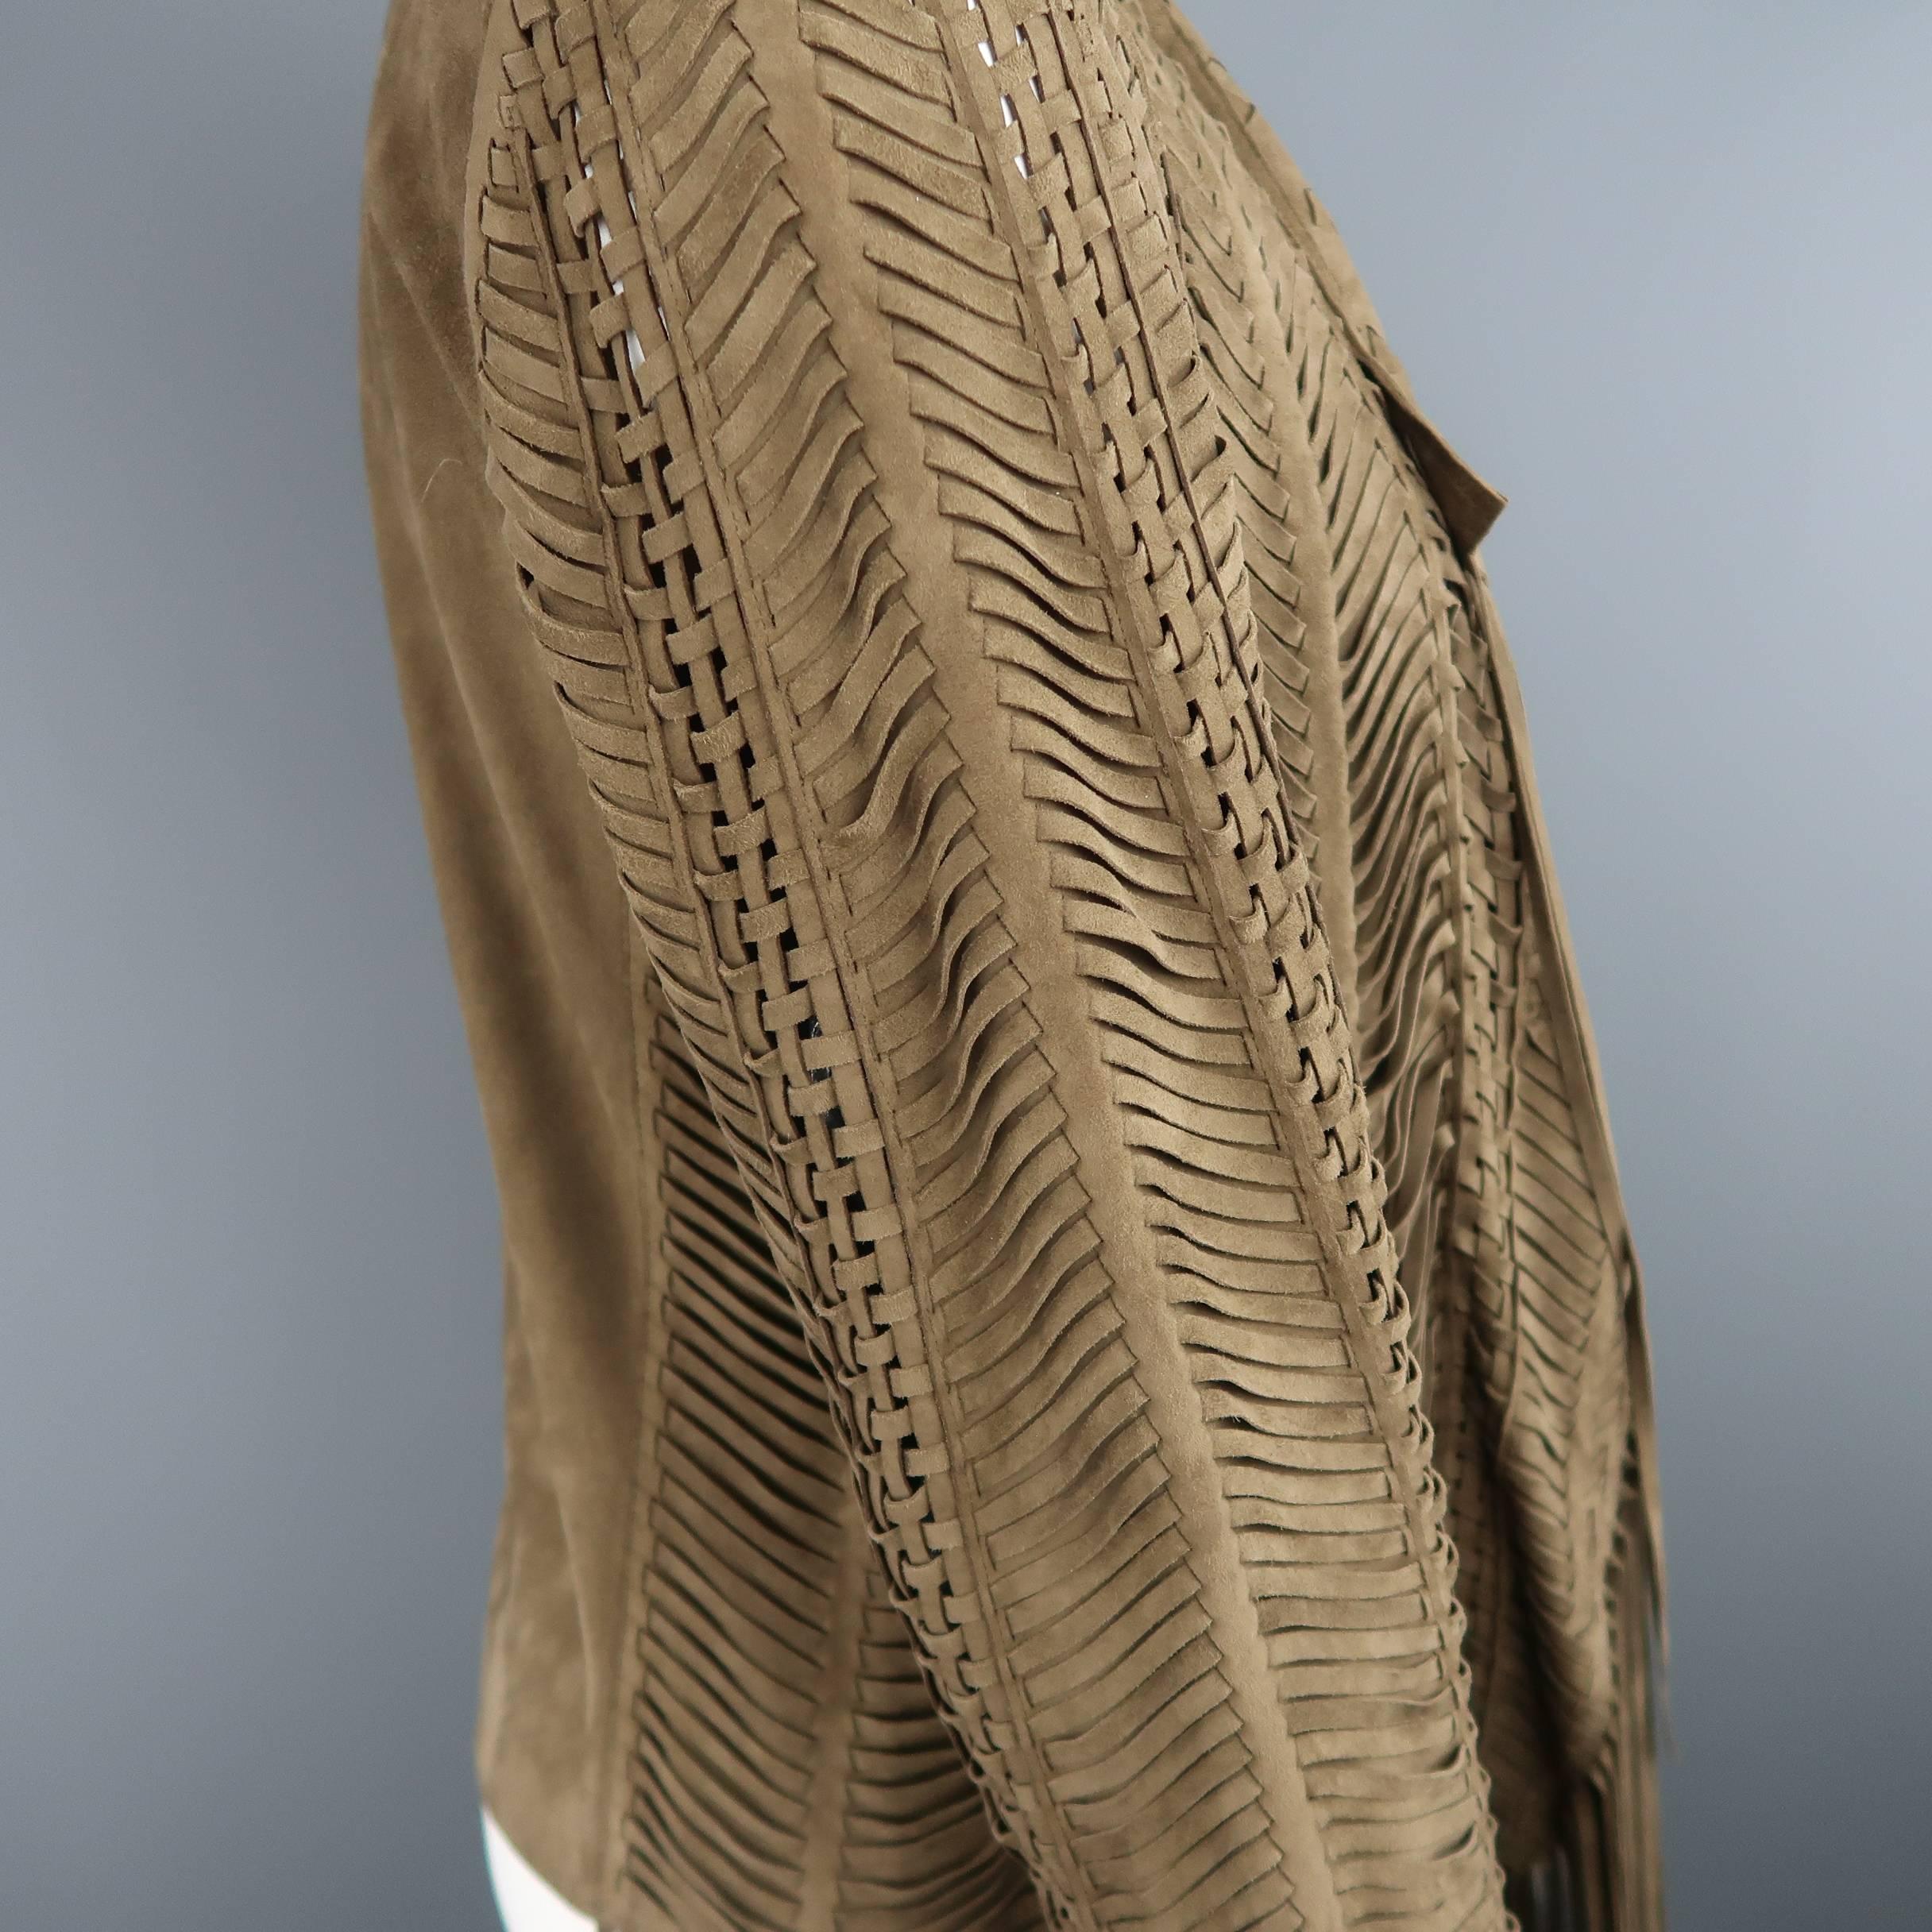 RALPH LAUREN COLLECTION Size 6 Olive Taupe Woven Fringe Jacket - Retail $4500 2